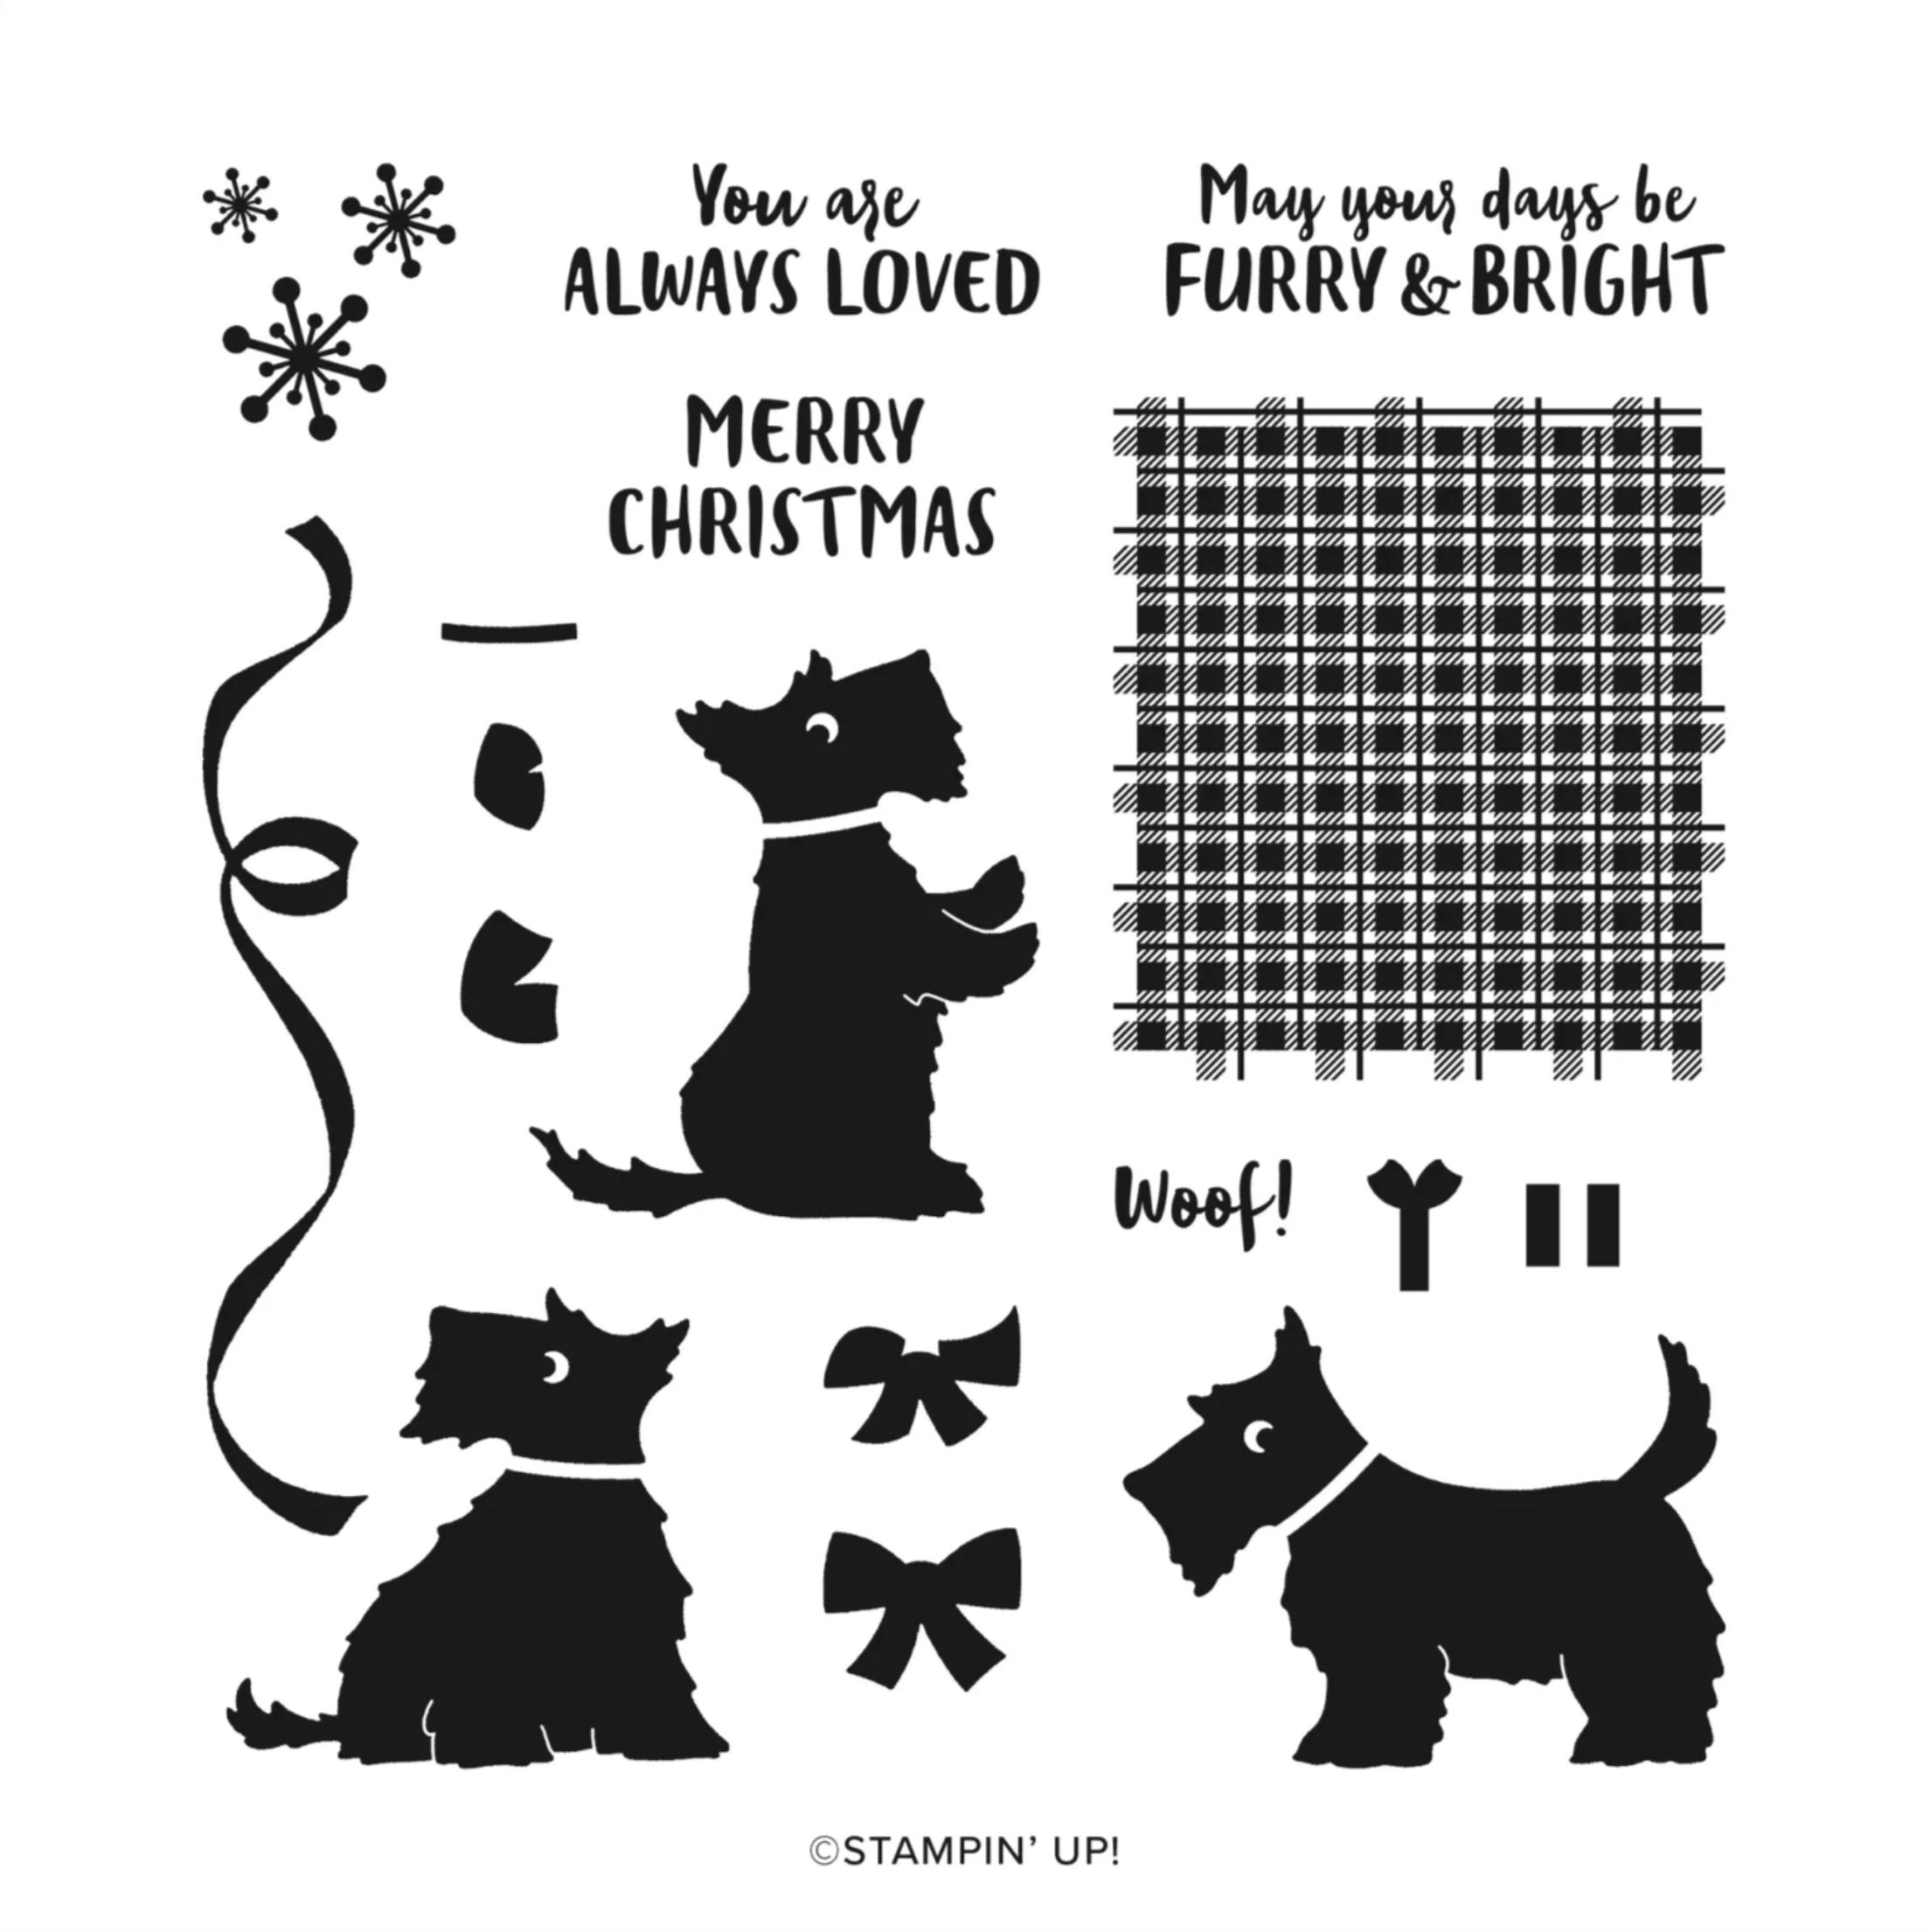 Stampin'-Up!-Christmas-Scottie-stamp-set-sold-in-Brandys-store